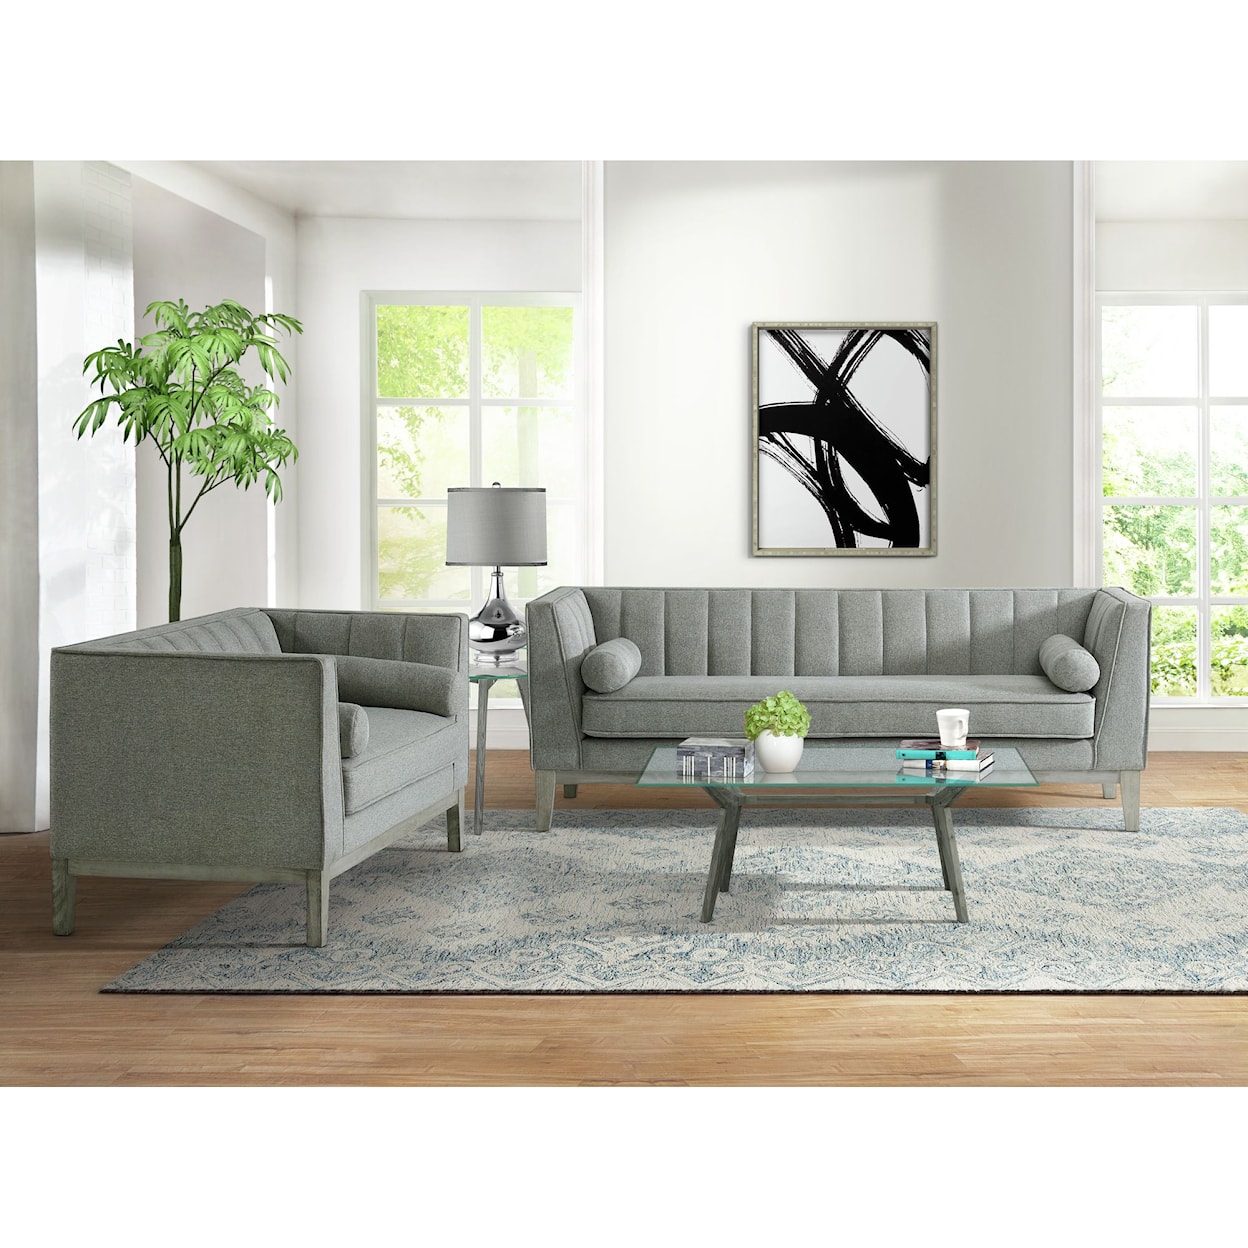 Elements International Cannes Stationary Living Room Groups